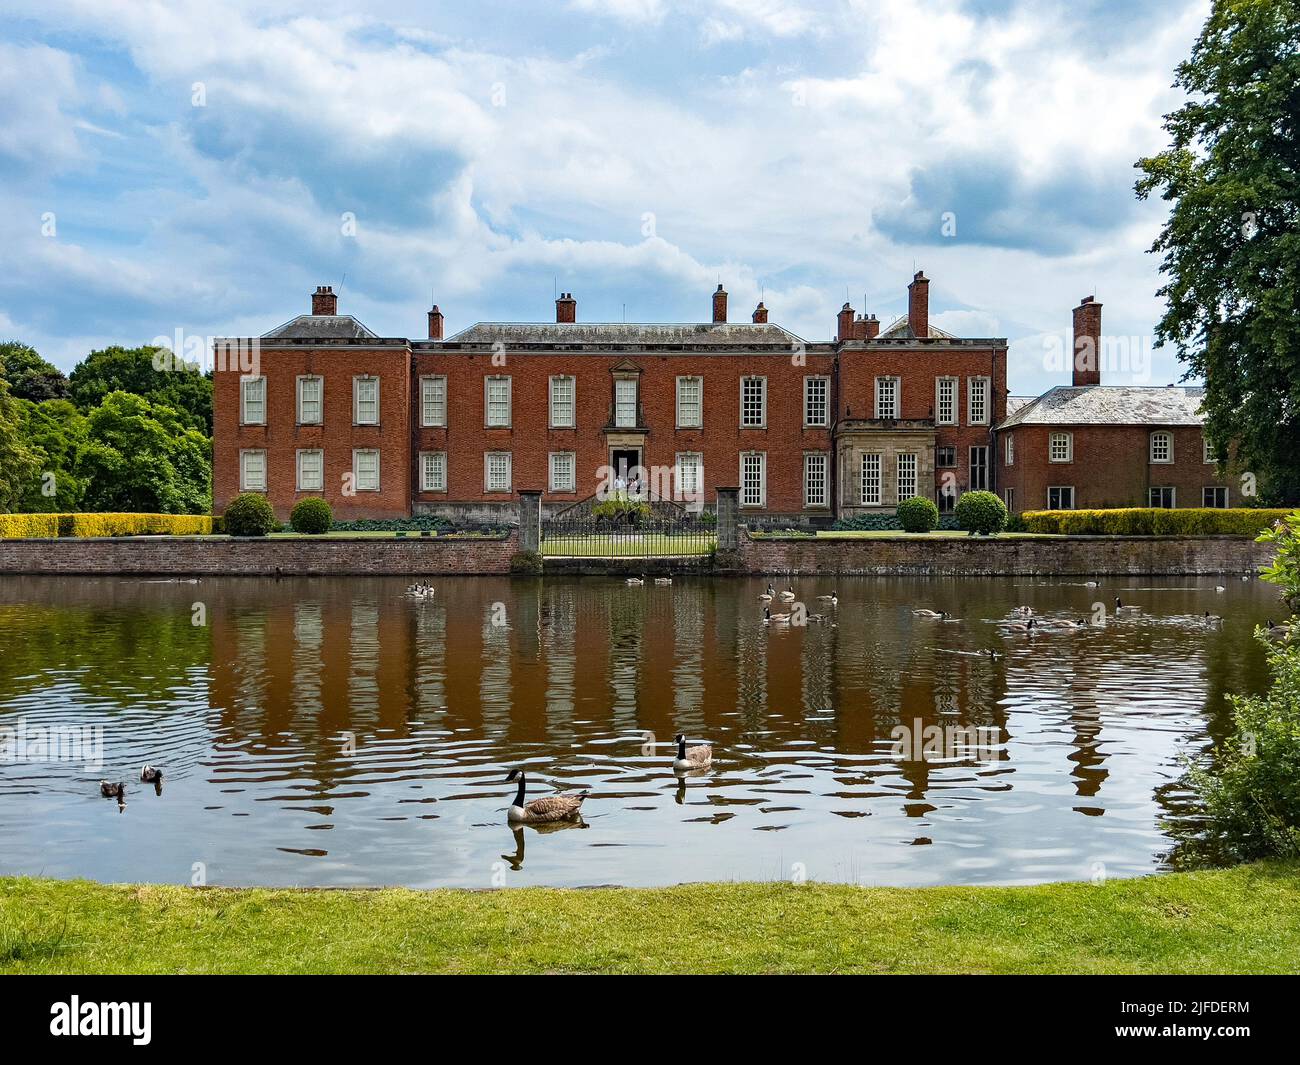 Dunham Massey Hall and moat in Greater Manchester, near Altrincham in northwest England. Stock Photo